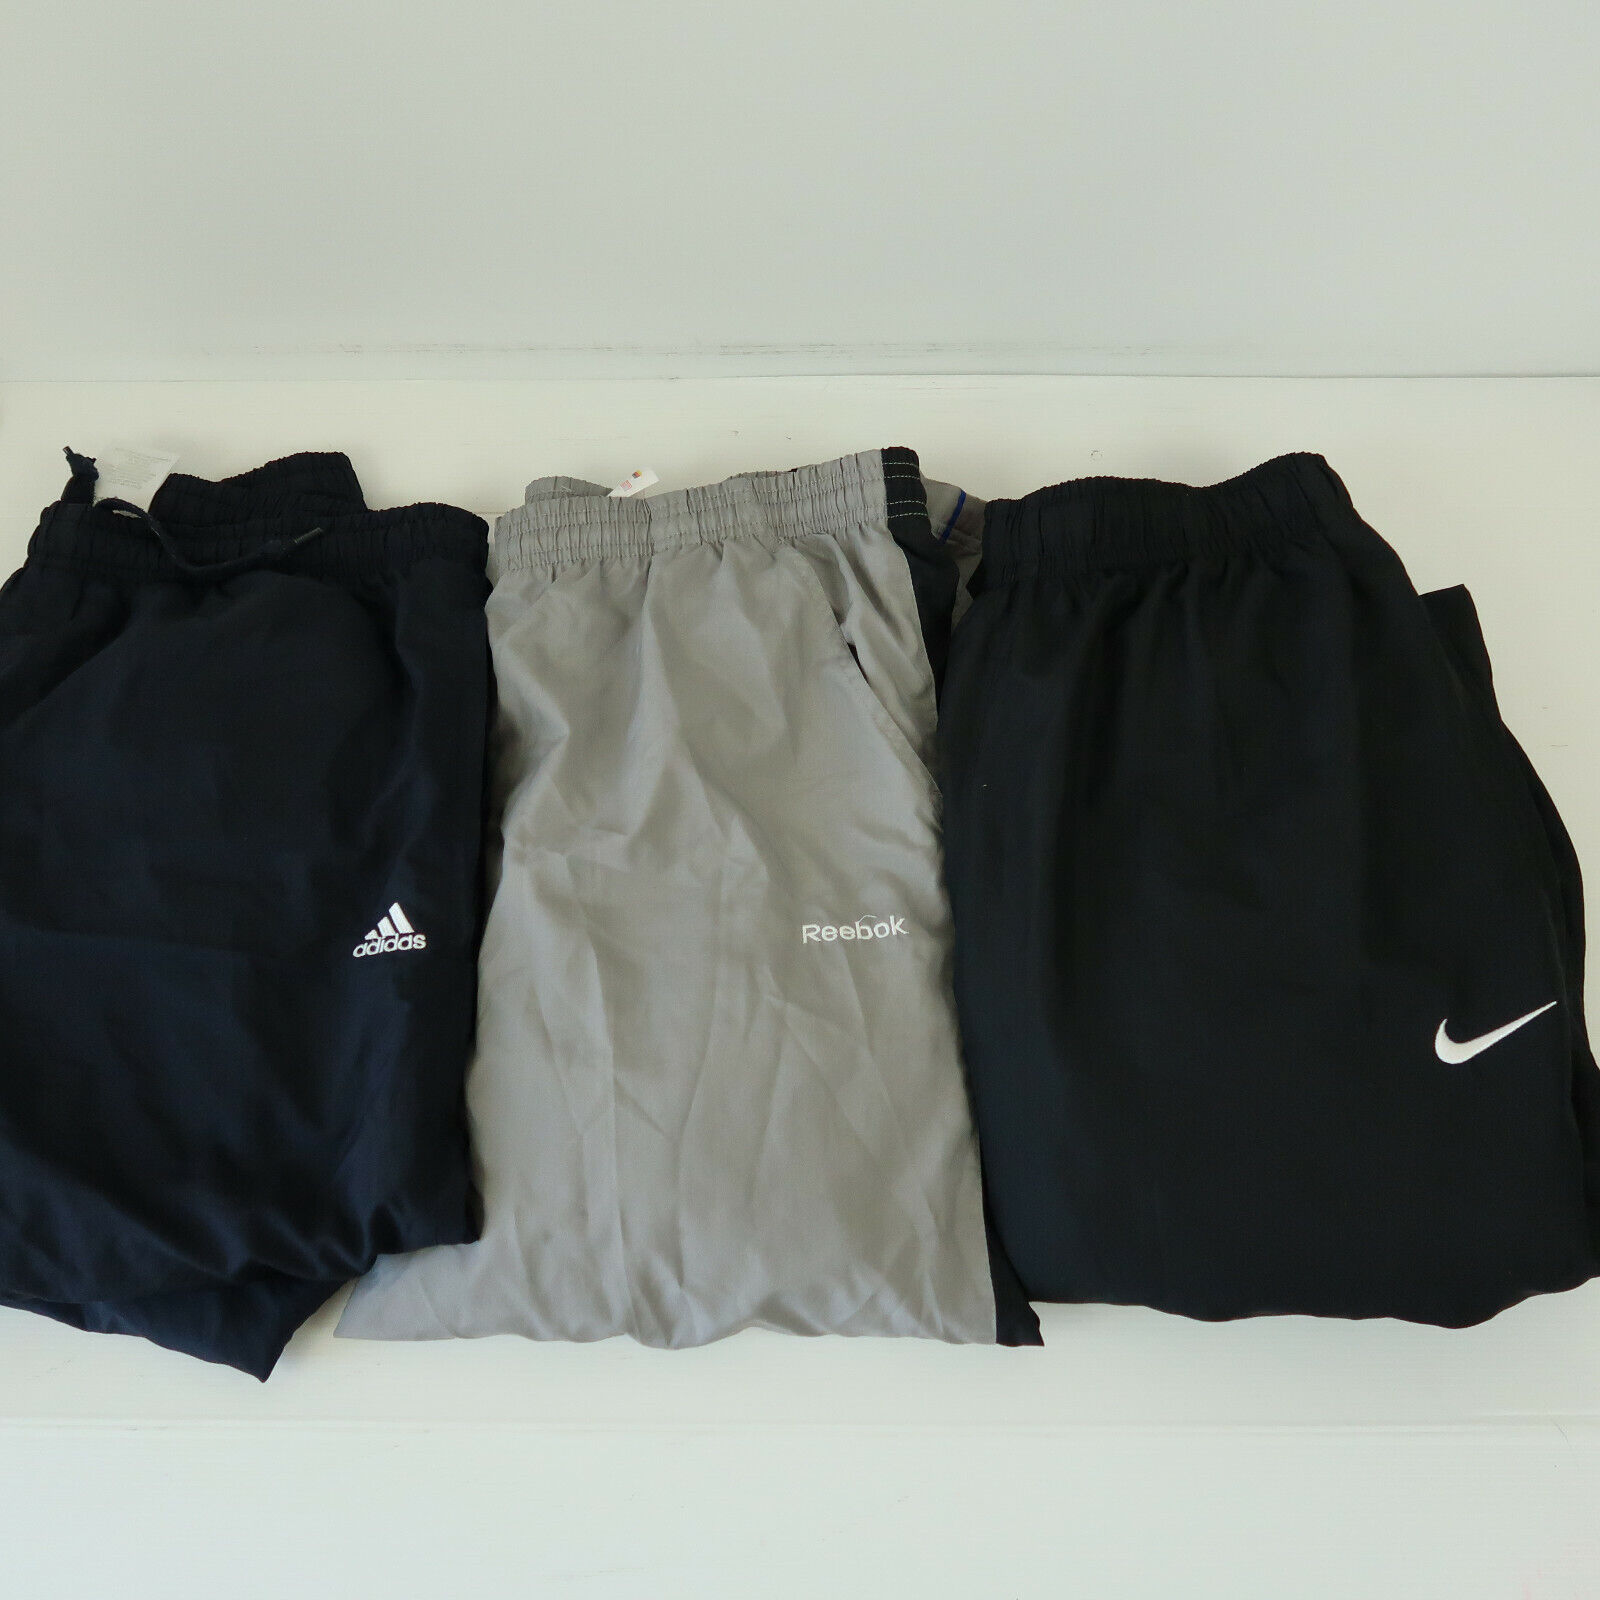 10x Track Pants Branded Nike Adidas Clothing Reseller Wholesale Bulk Lot Bundle Assorted Does Not Apply - фотография #3